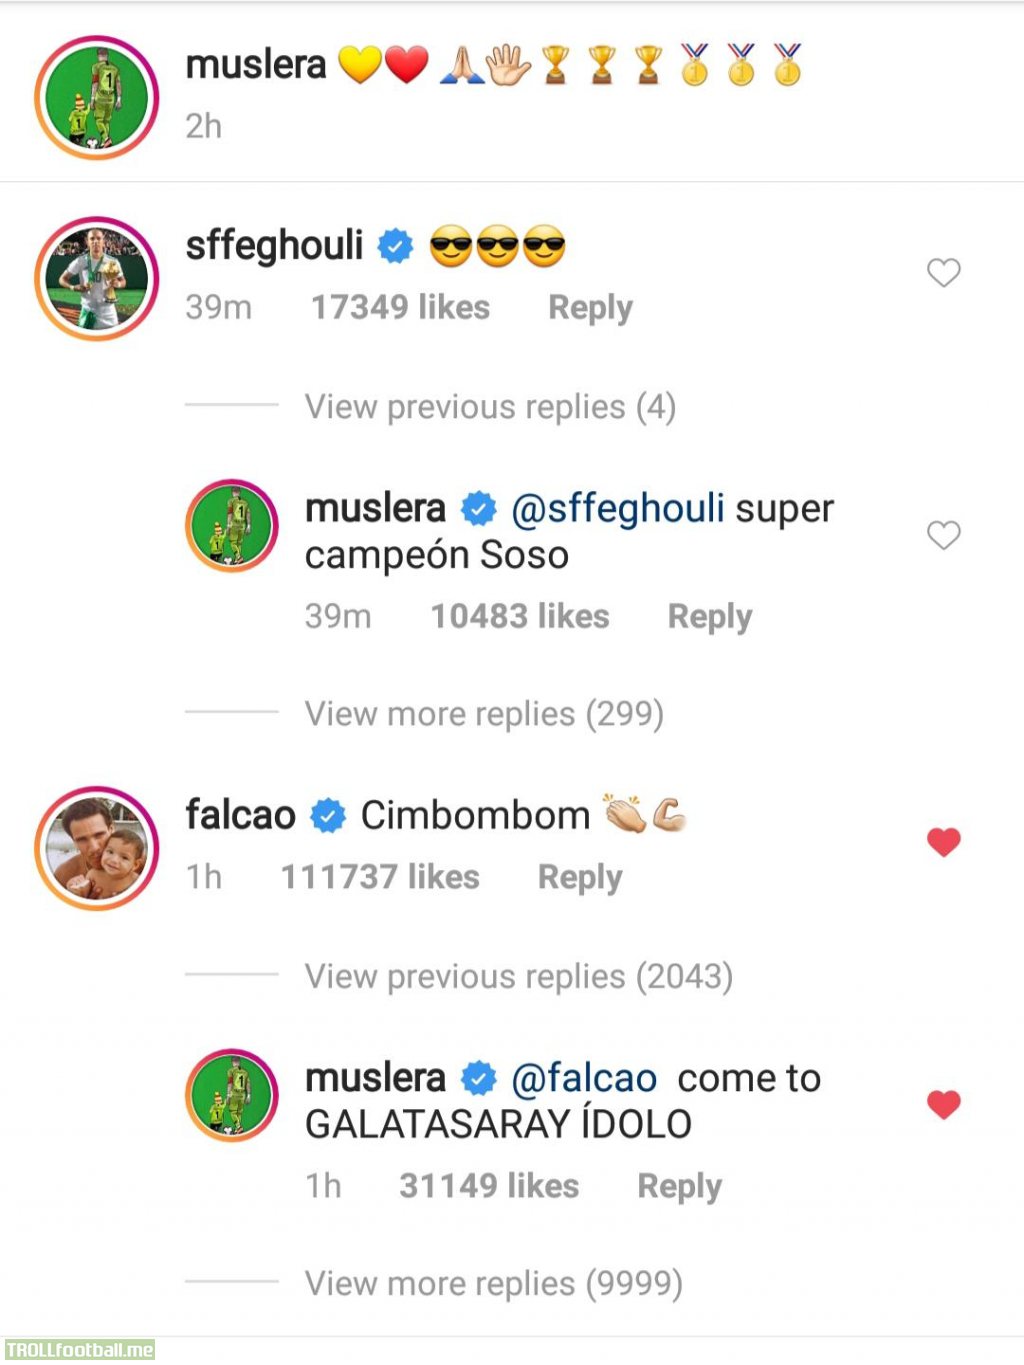 Falcao comments "Cimbombom" (GS Cheer) on Muslera's post